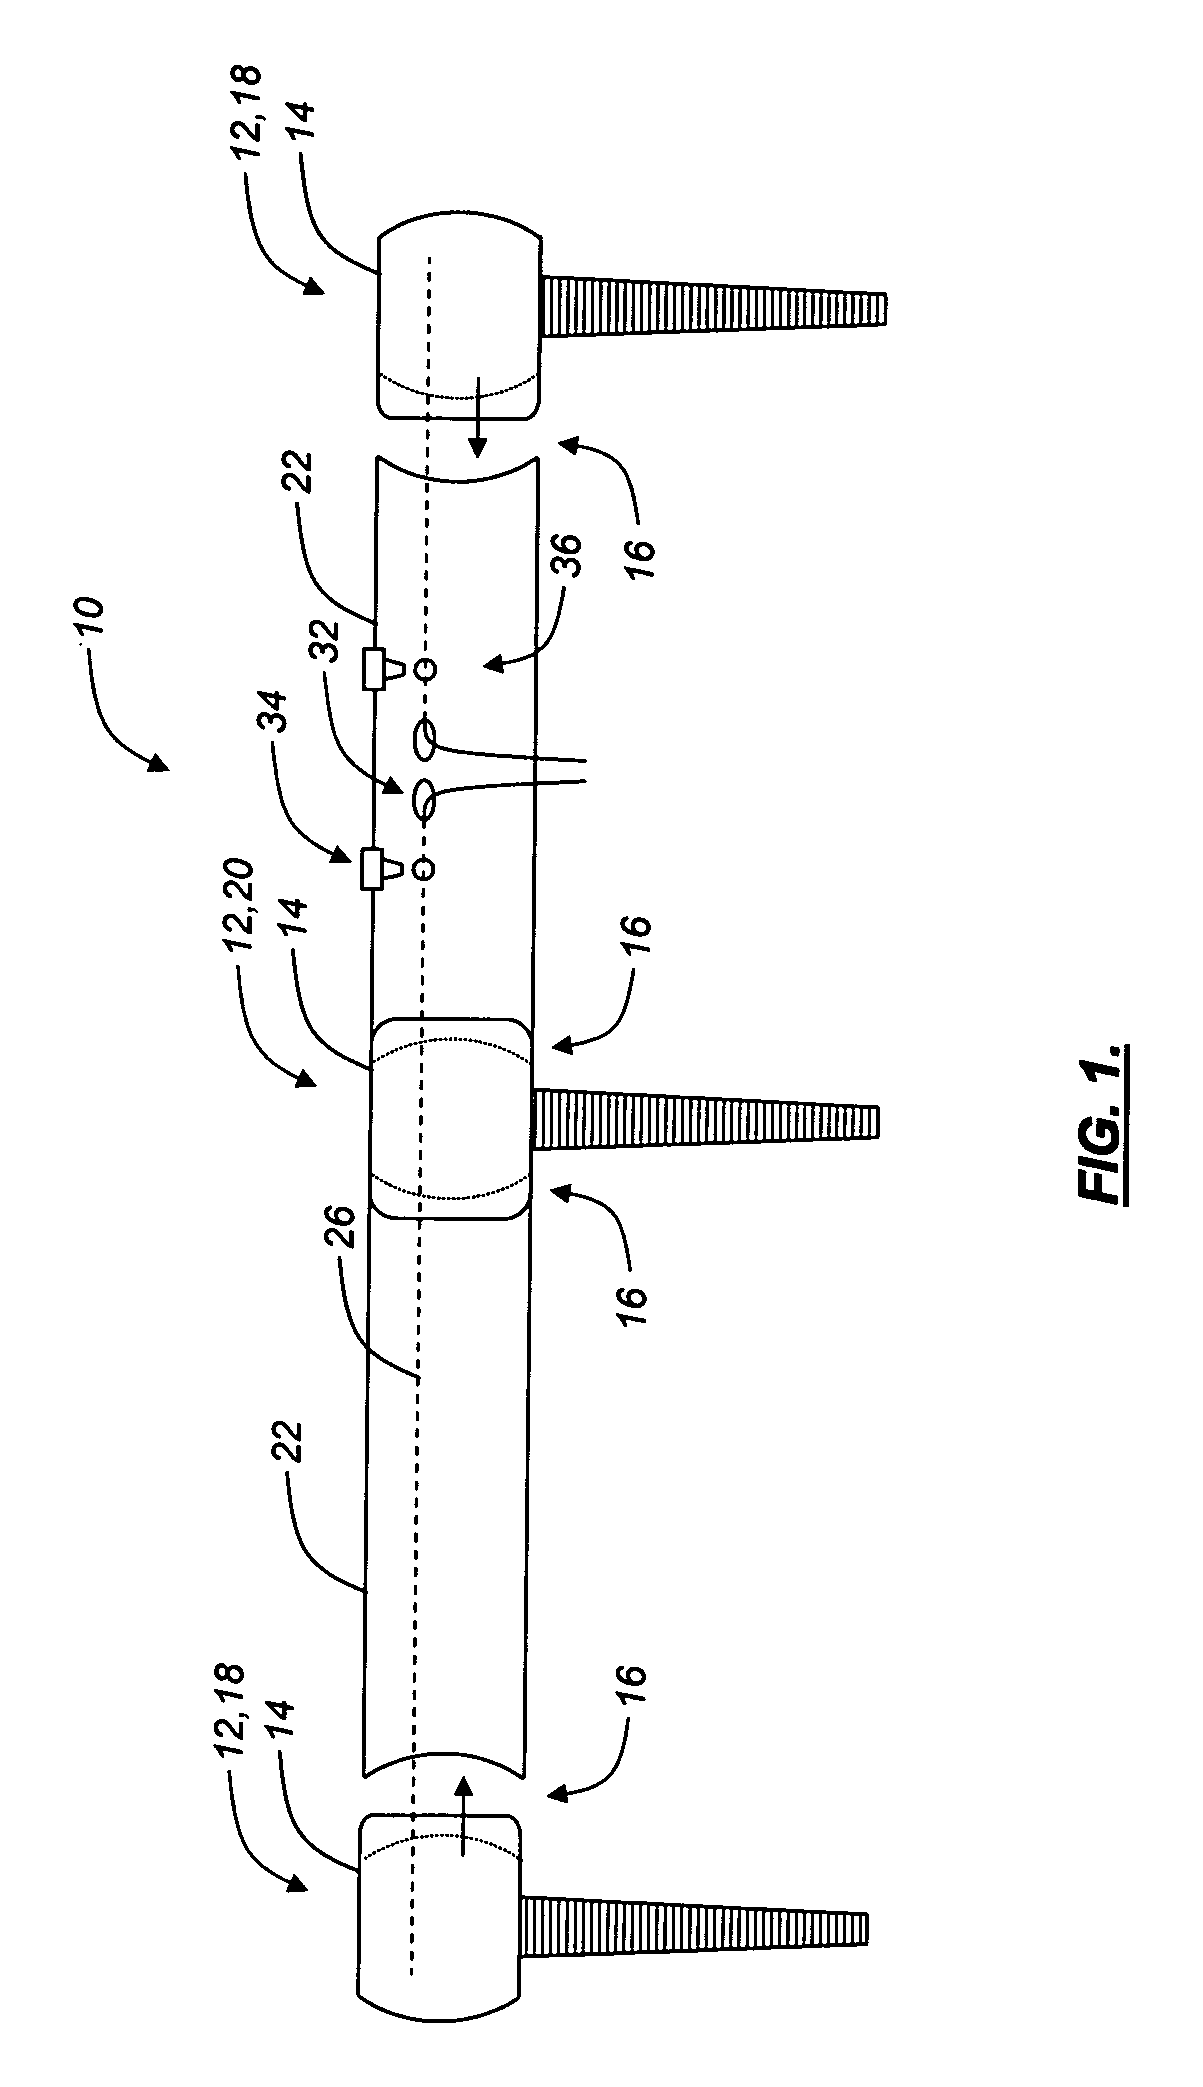 Pedicle screw-based dynamic posterior stabilization systems and methods